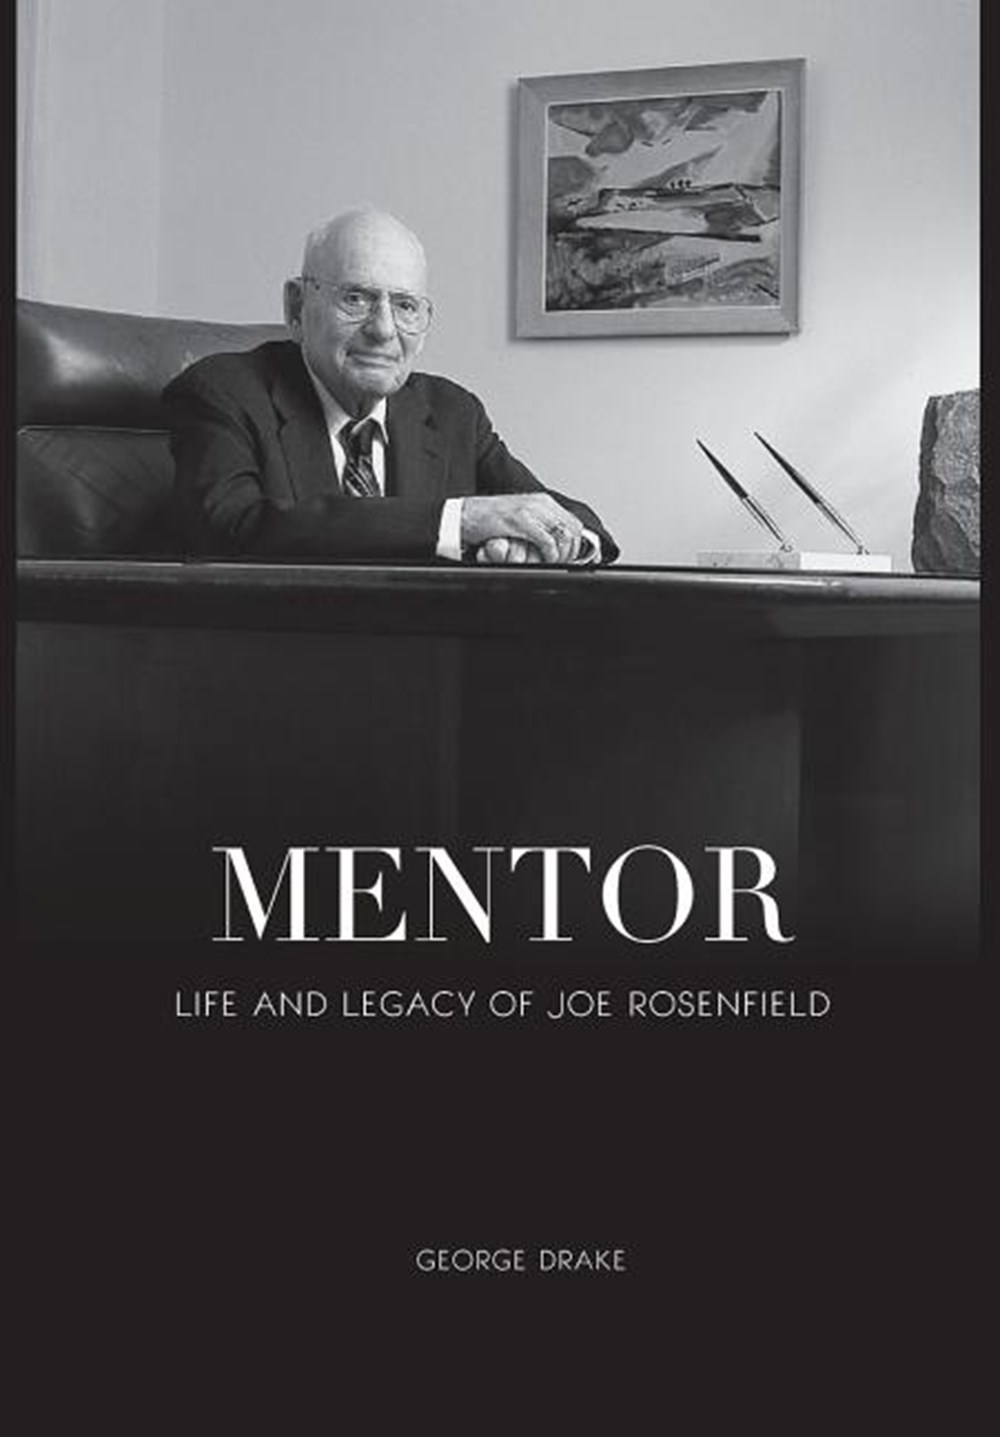 Mentor: Life and Legacy of Joe Rosenfield